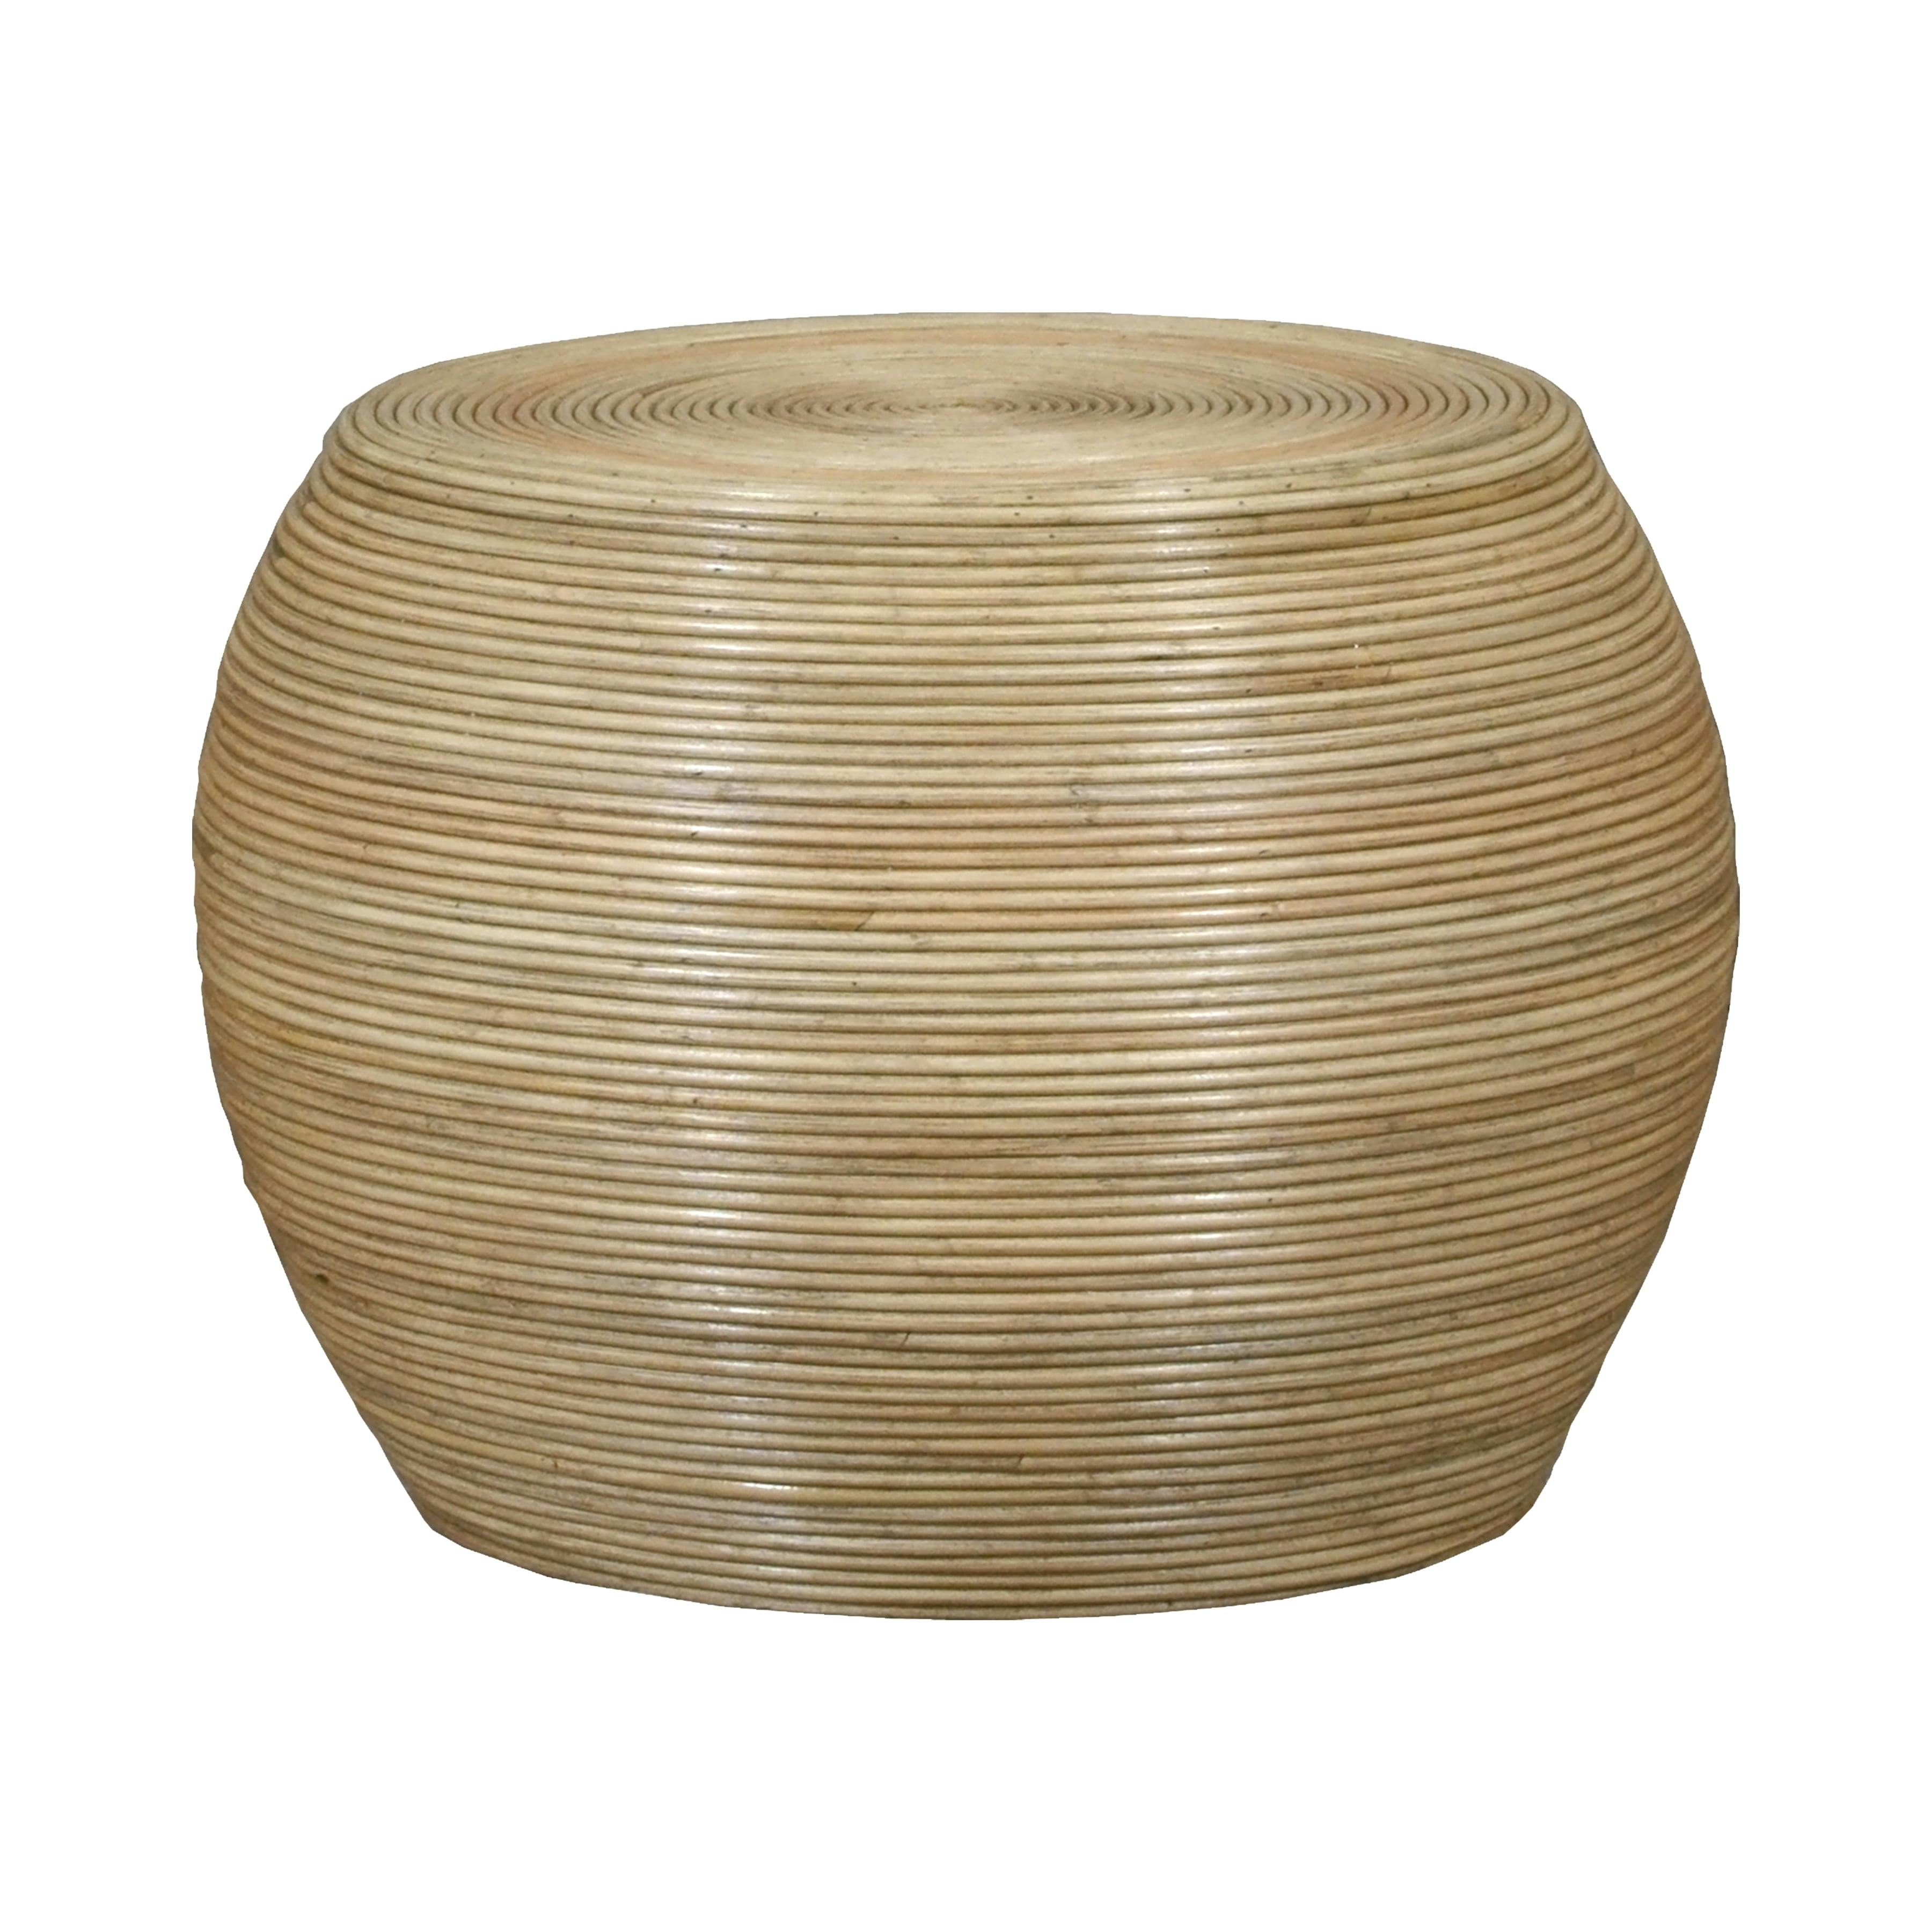 Coastal Chic 25" Round Natural Rattan Outdoor Coffee Table